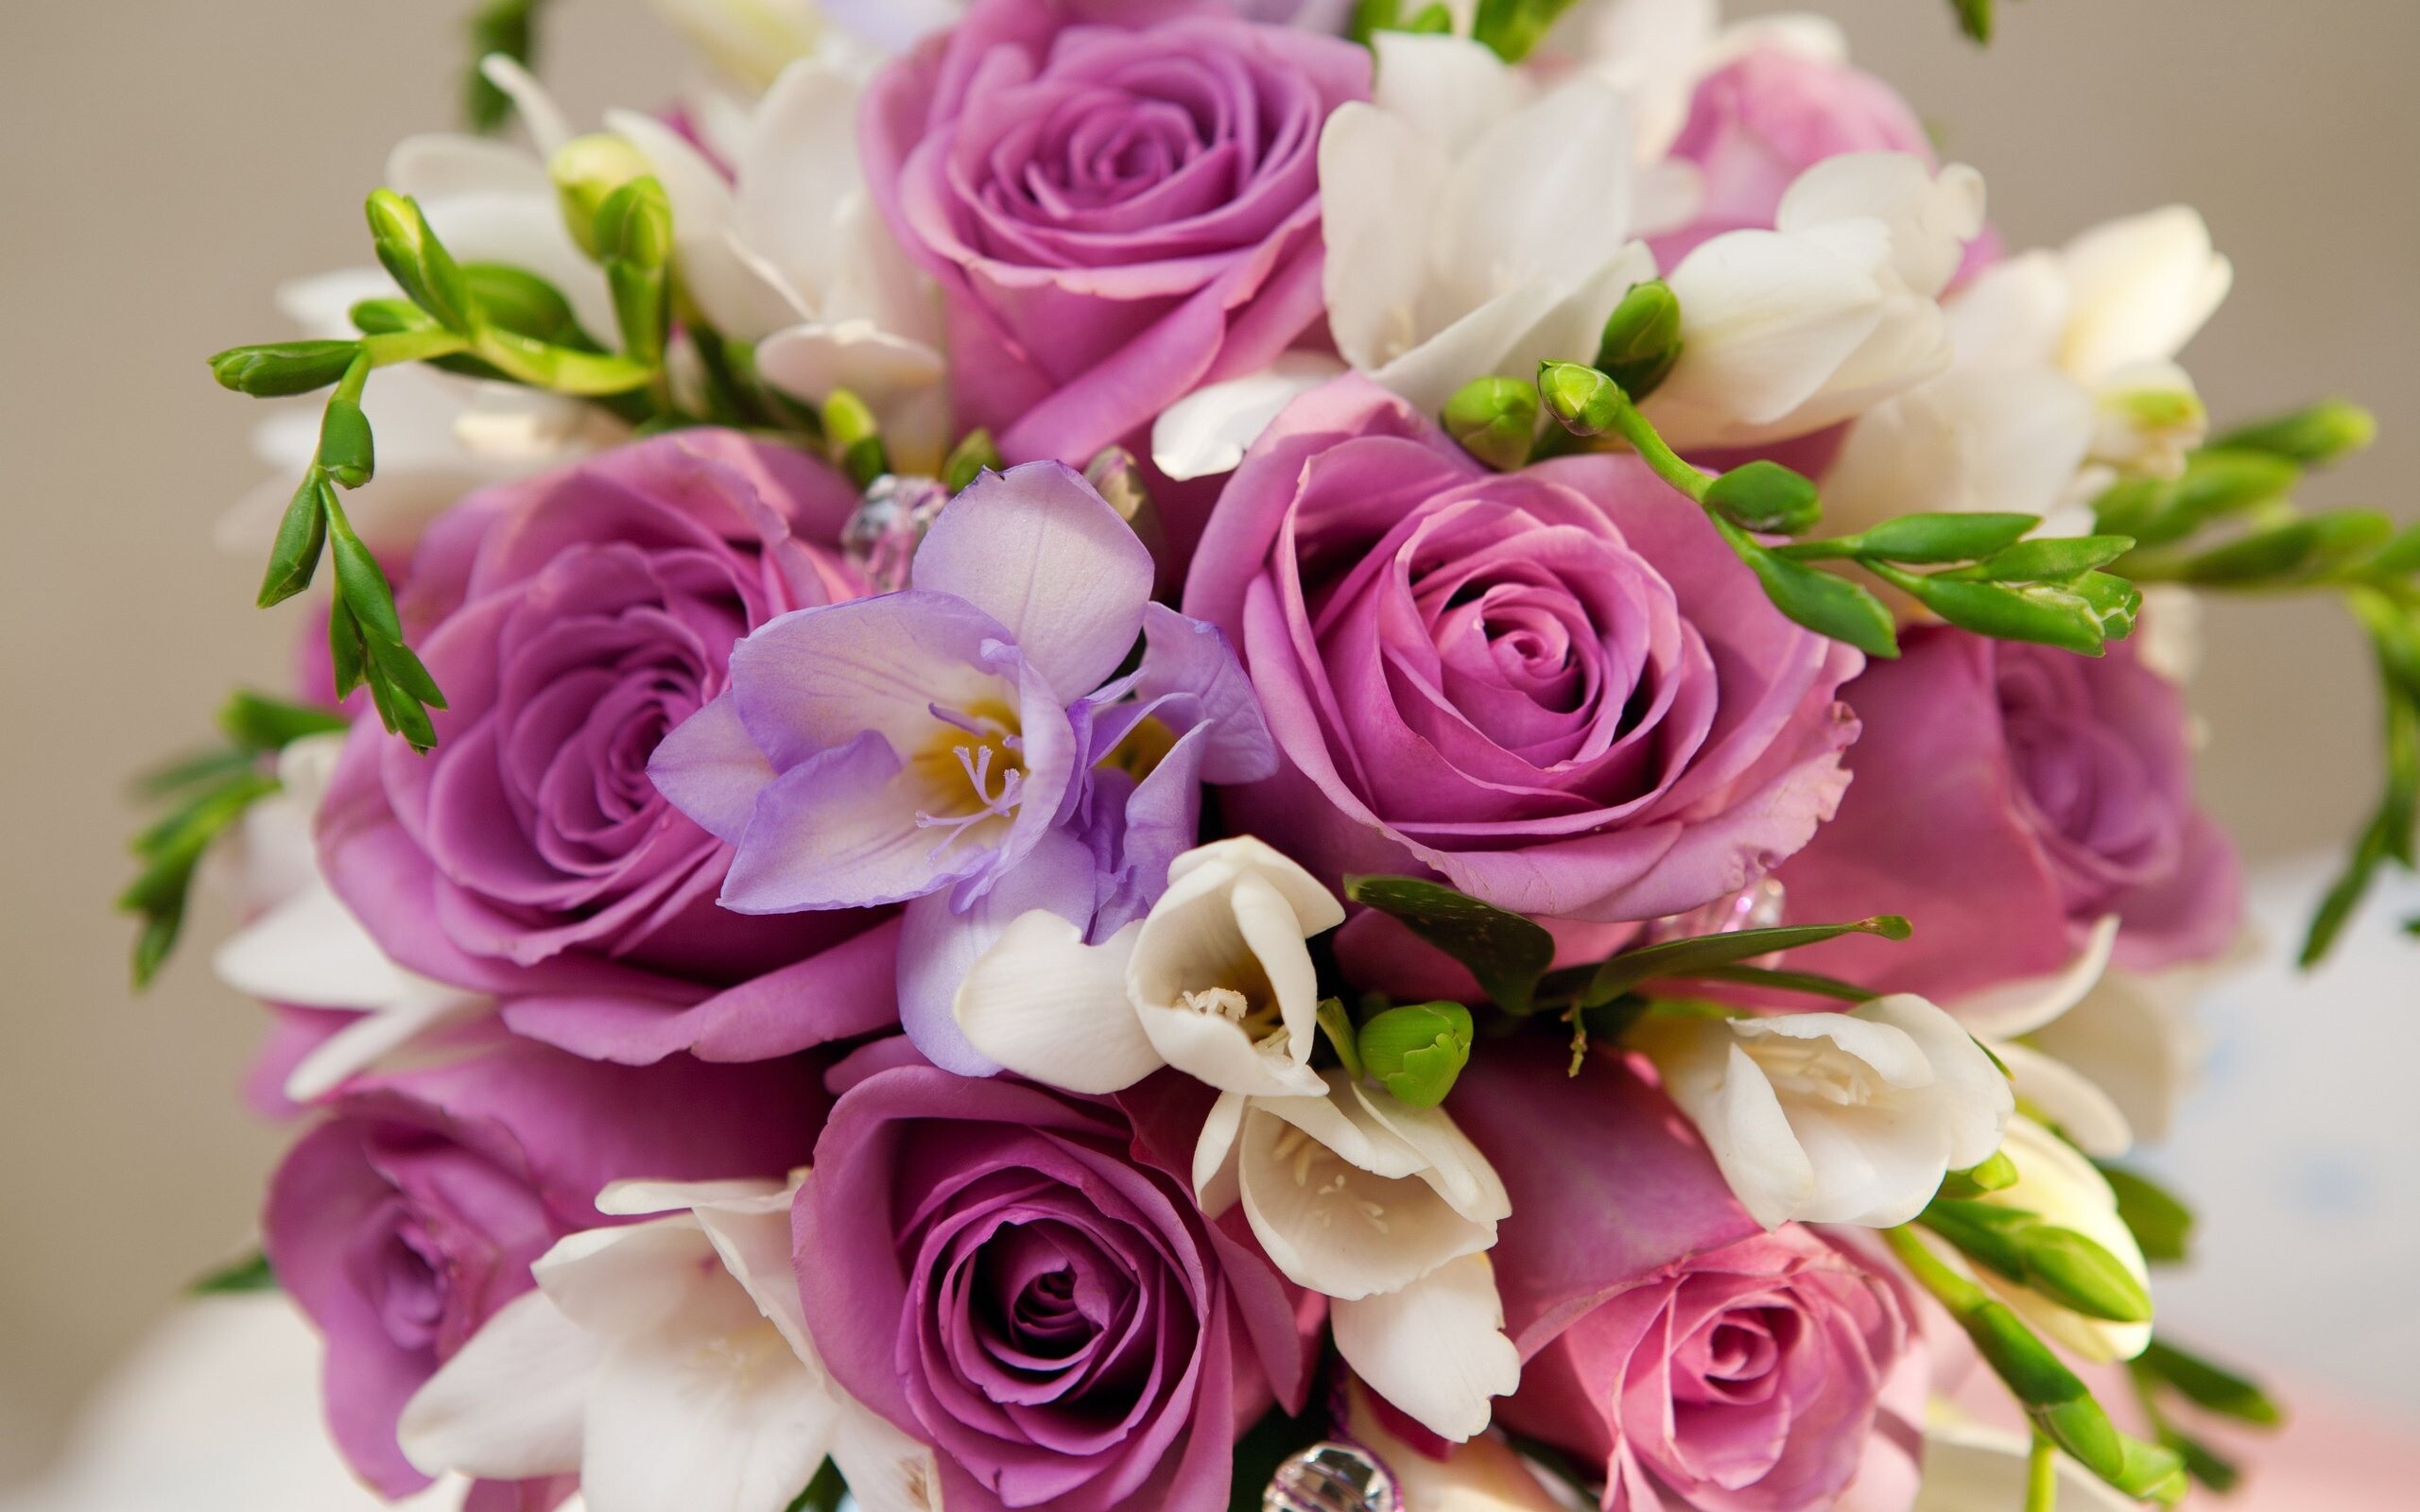 Flower Bouquet: An attractively arranged bunch of flowers, especially one presented as a gift or carried at a ceremony. 2560x1600 HD Wallpaper.